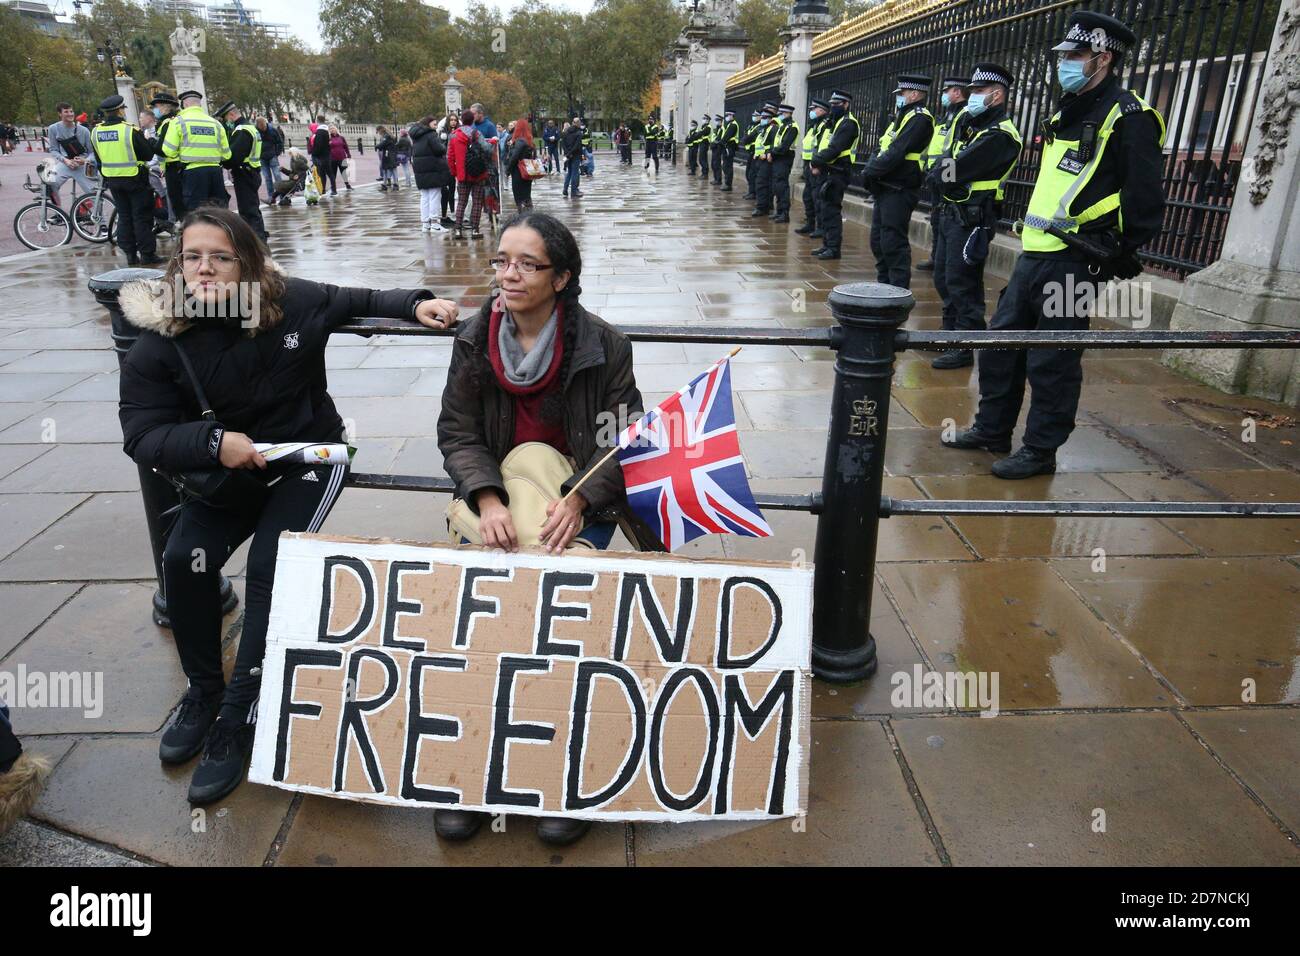 Demonstrators sit in front of a police cordon outside the main gate of Buckingham Palace, London, during a protest against the lockdown restrictions brought in to prevent the spread of coronavirus. Stock Photo